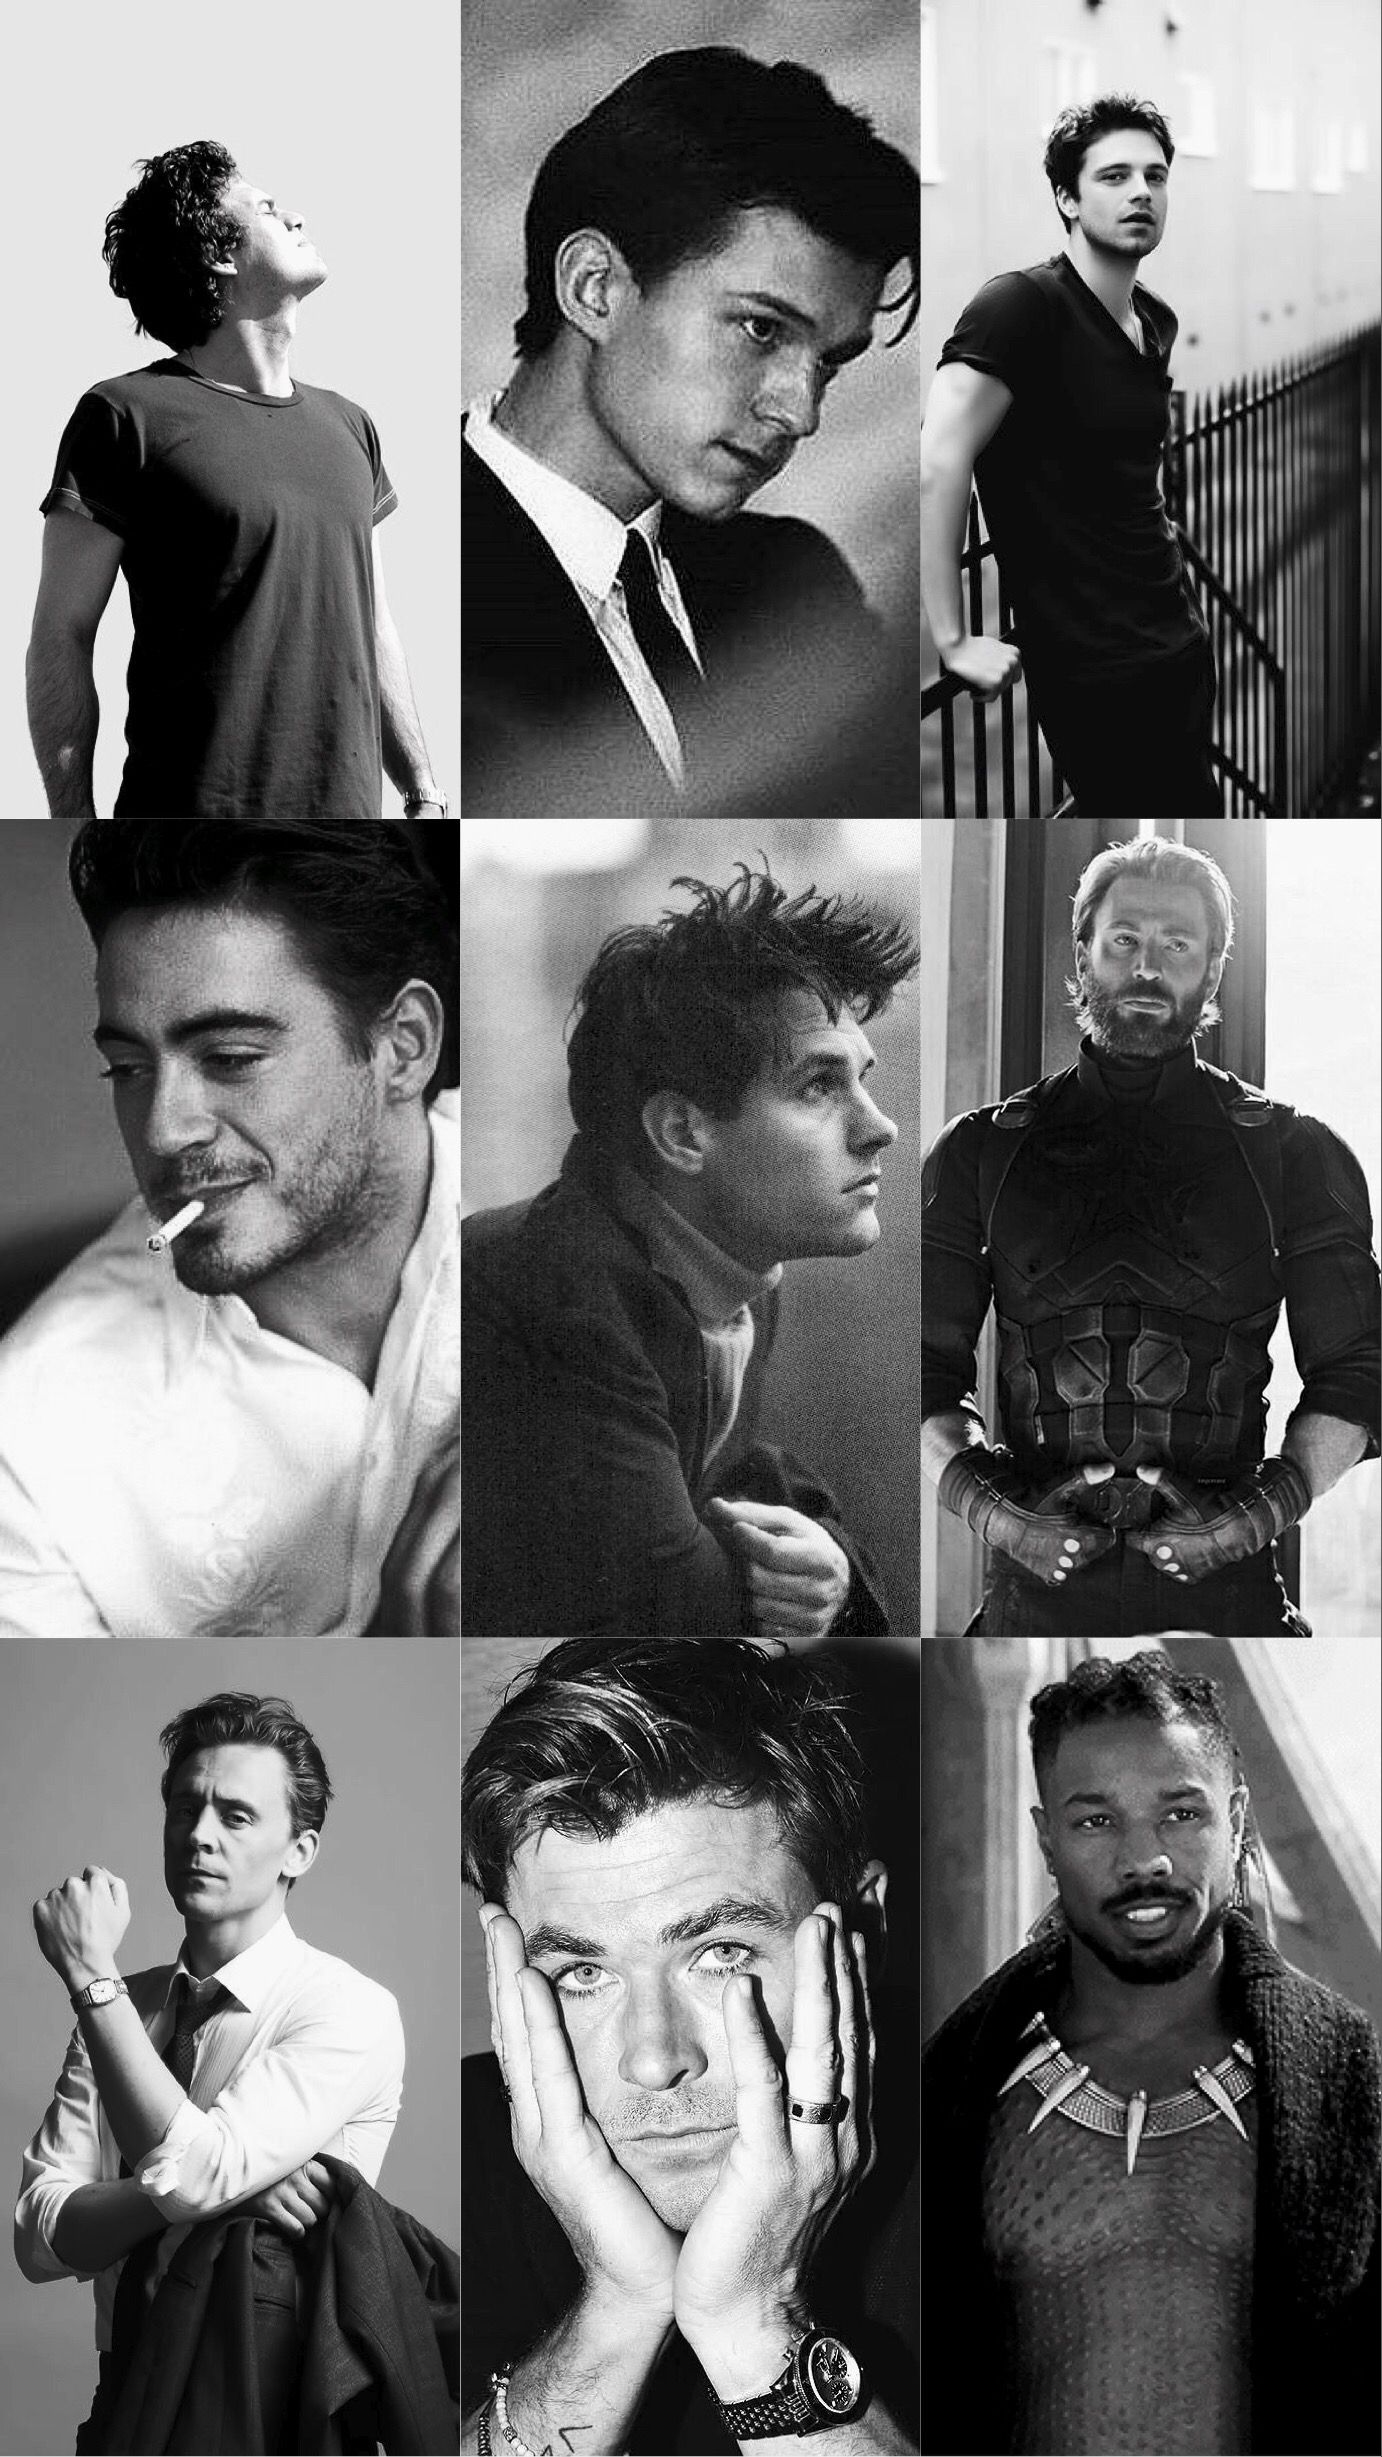 A collage of black and white photos of male celebrities. - Avengers